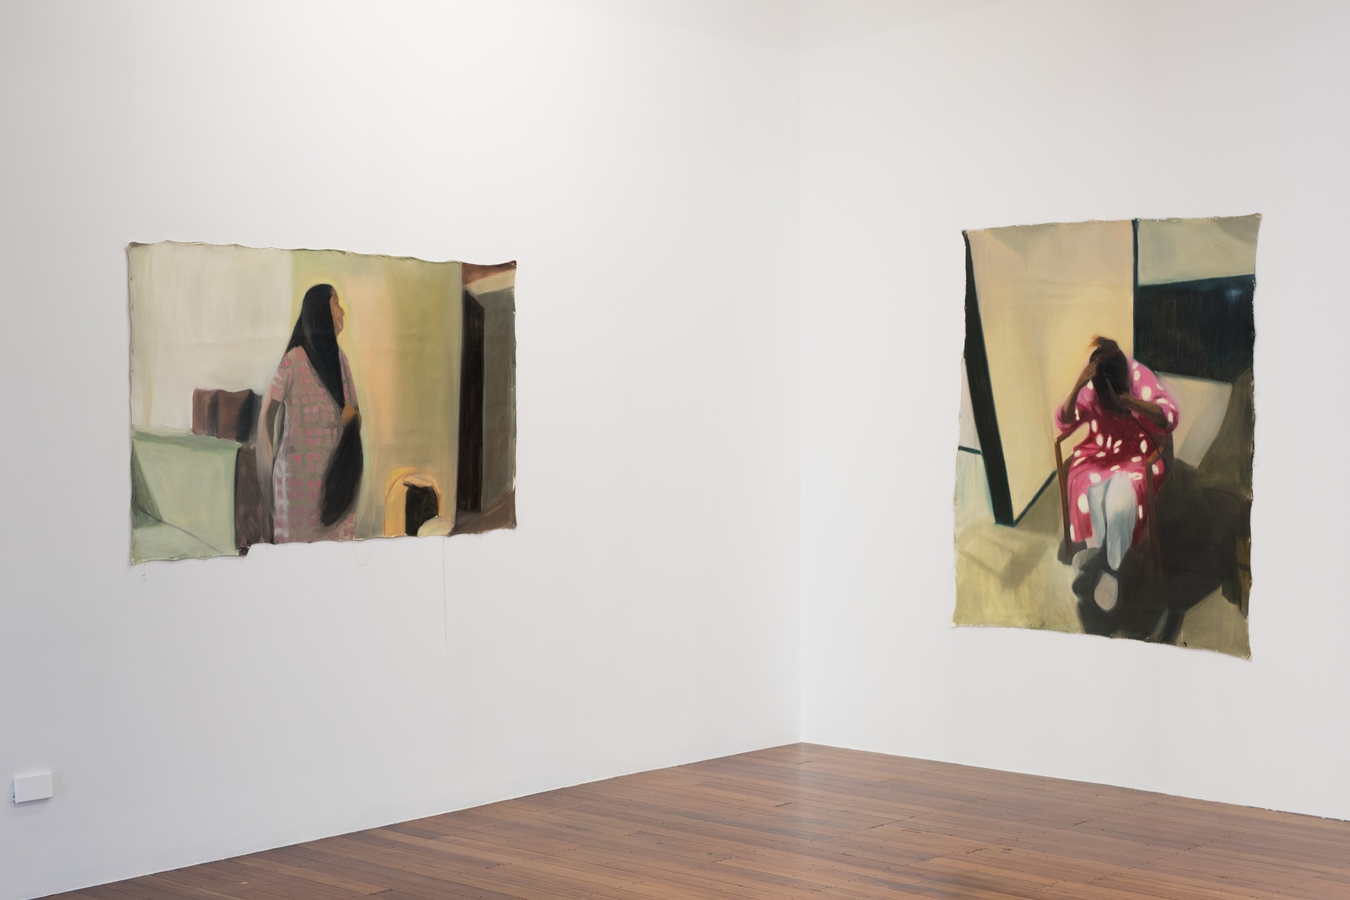 brunelle dias, the way things are (installation view), 2022. Photo by Janneth Gil.